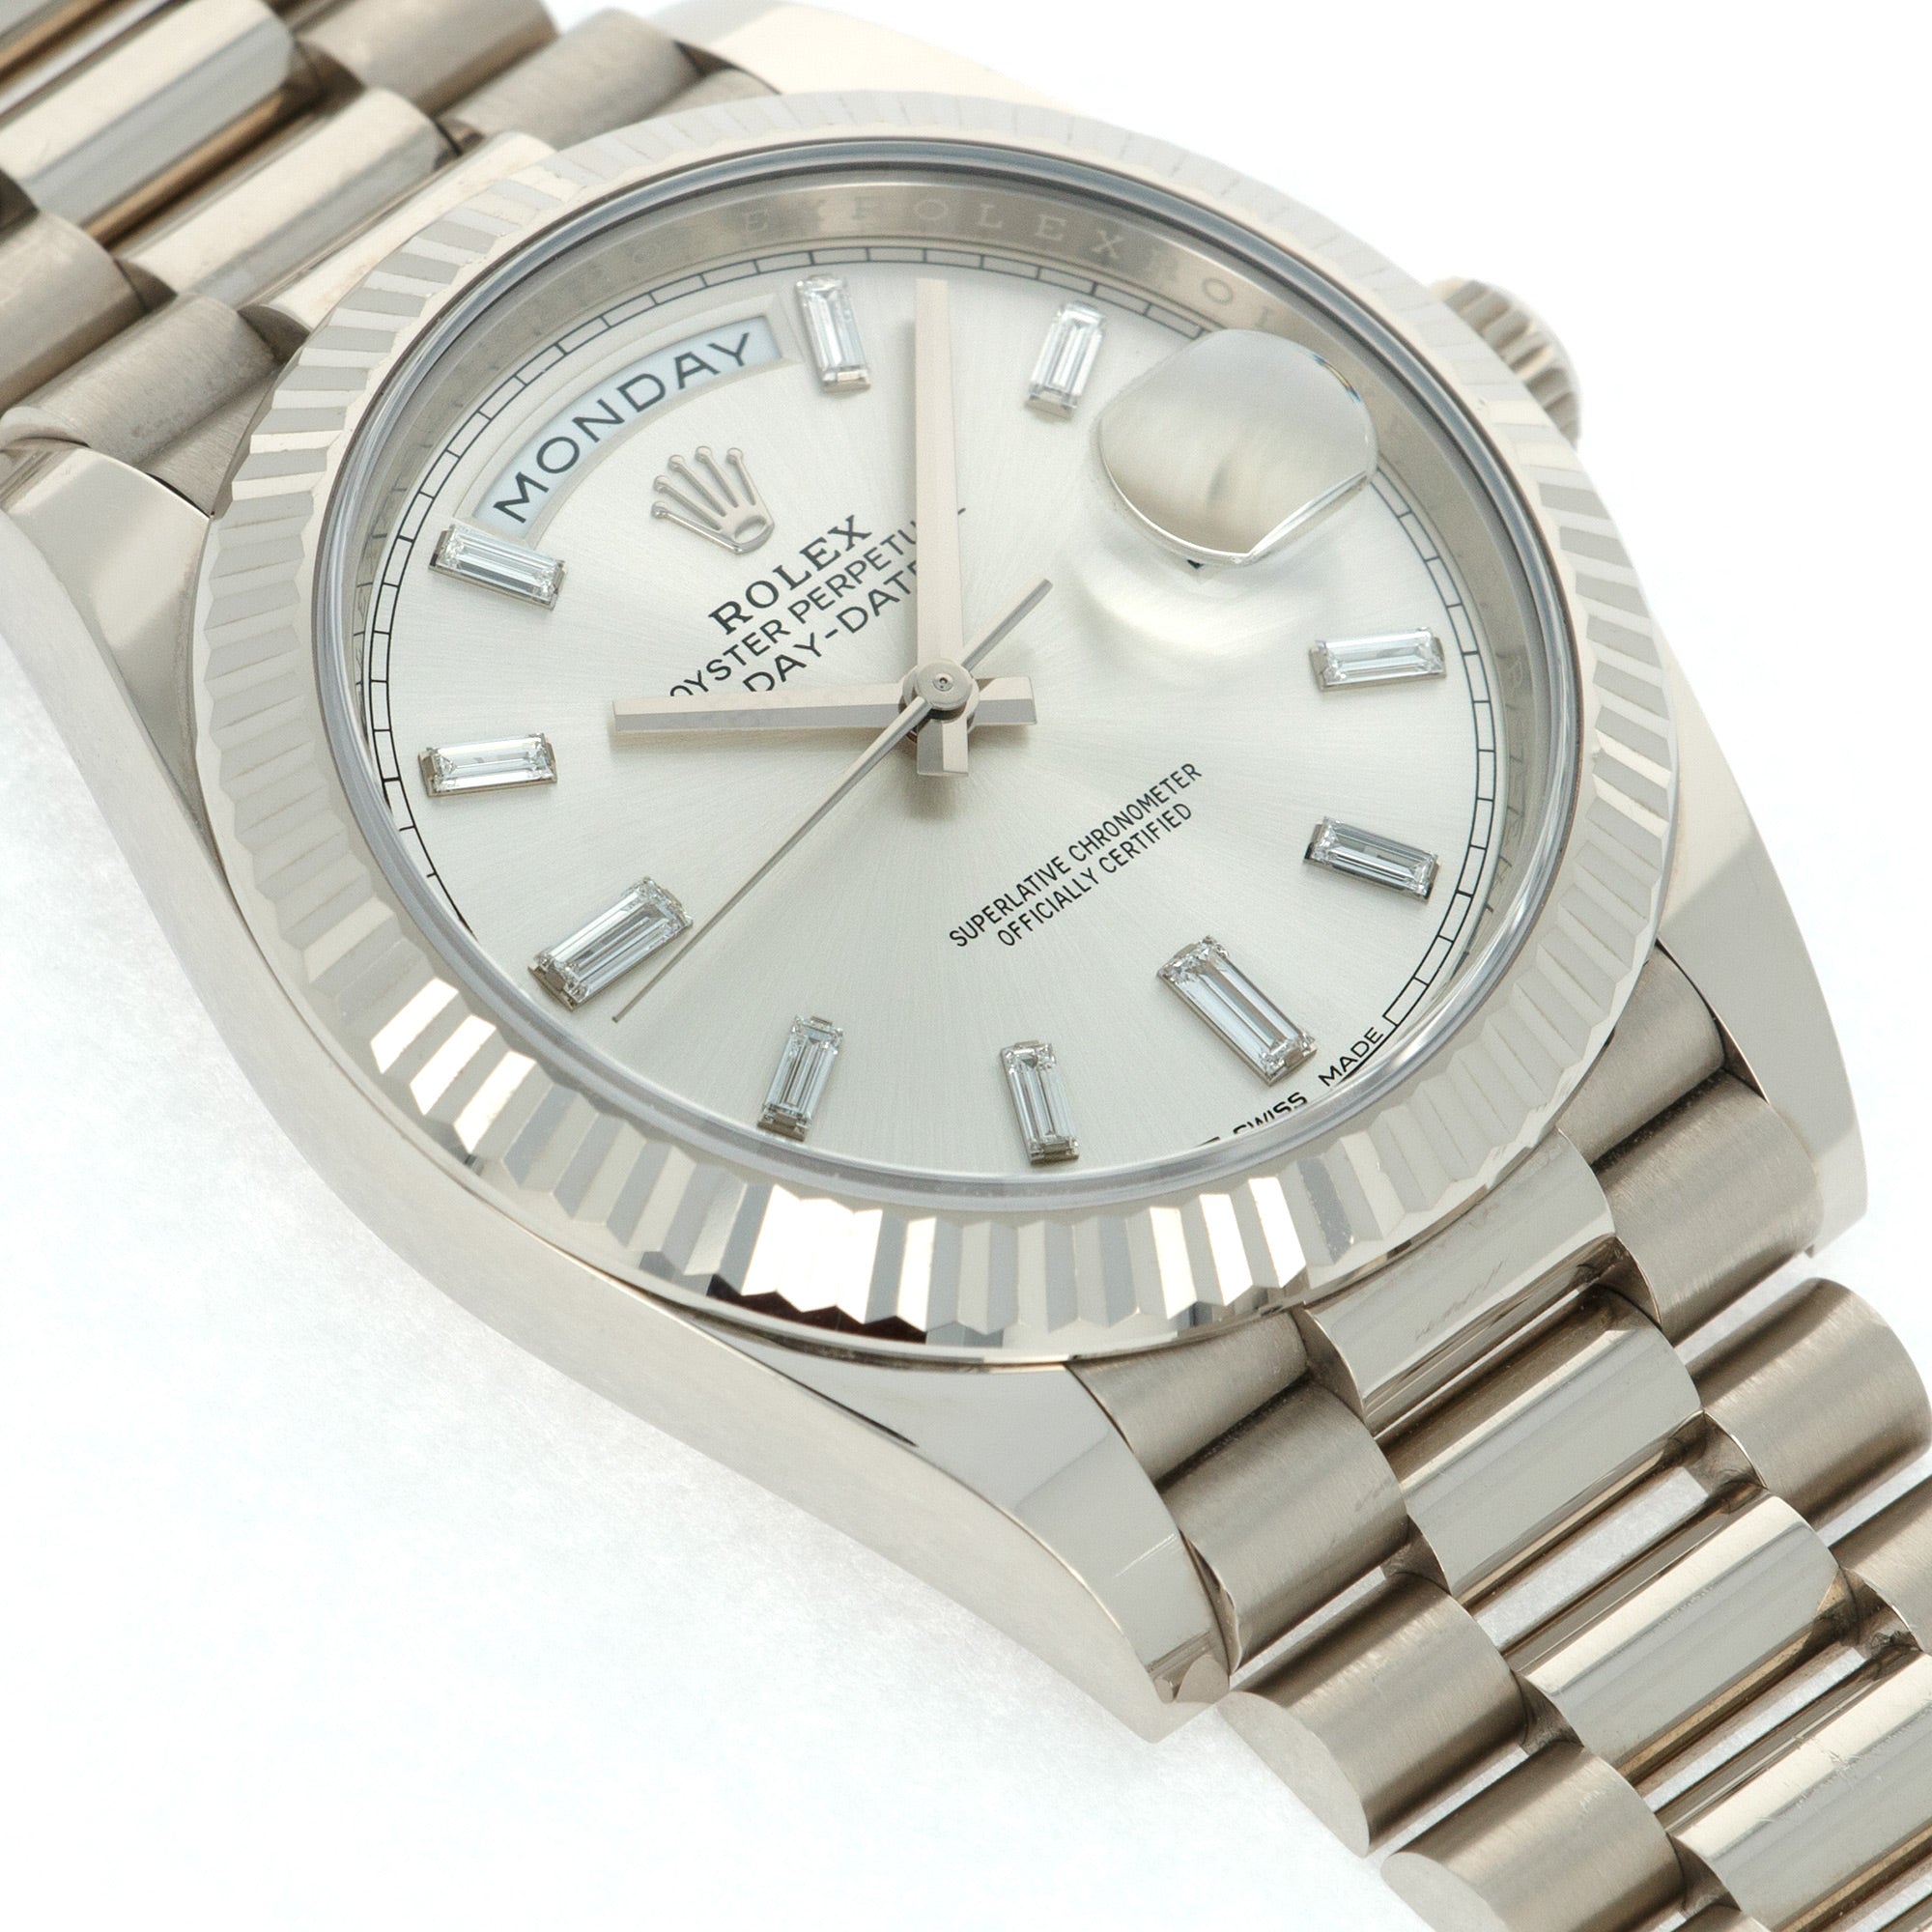 Rolex - Rolex White Gold Day-Date Ref. 228239 with Factory Baguette Diamond Dial - The Keystone Watches